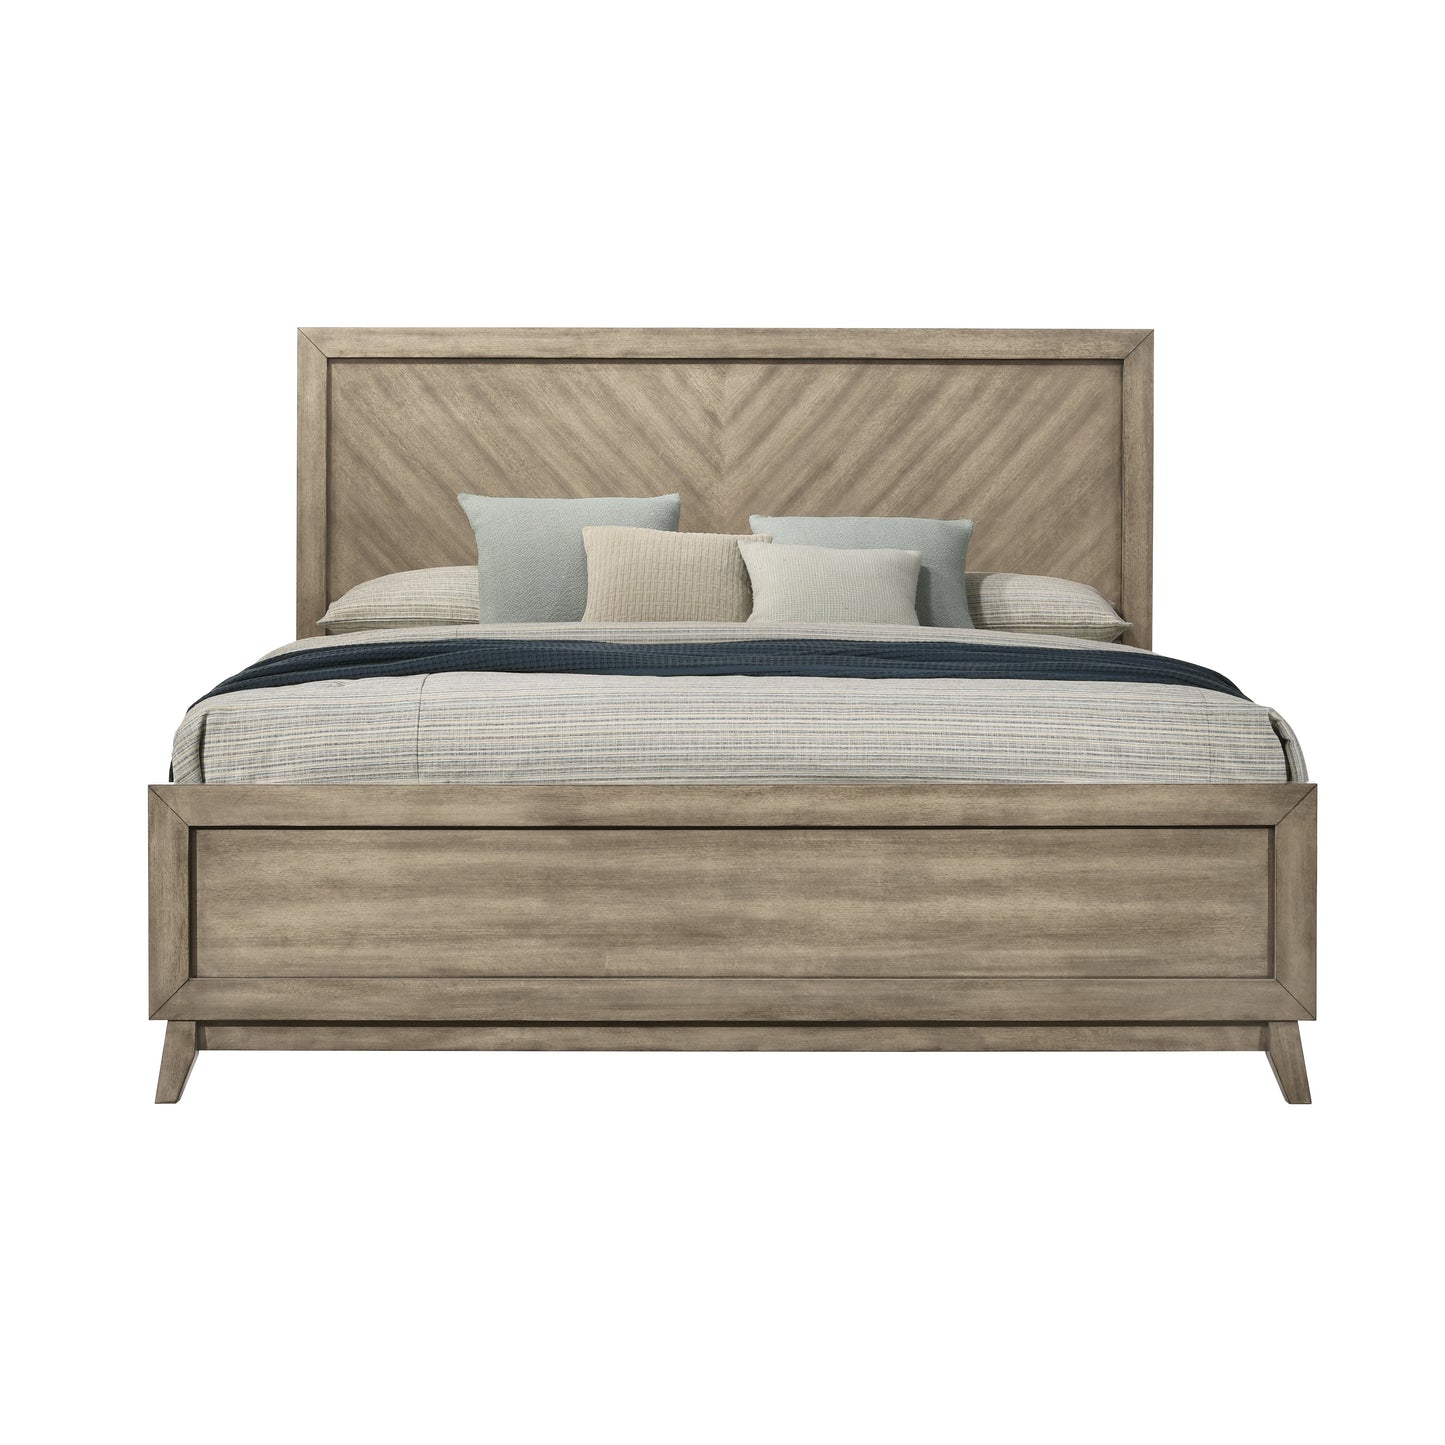 Roundhill Furniture Arena Contemporary Wood Panel Bed in Antique Gray